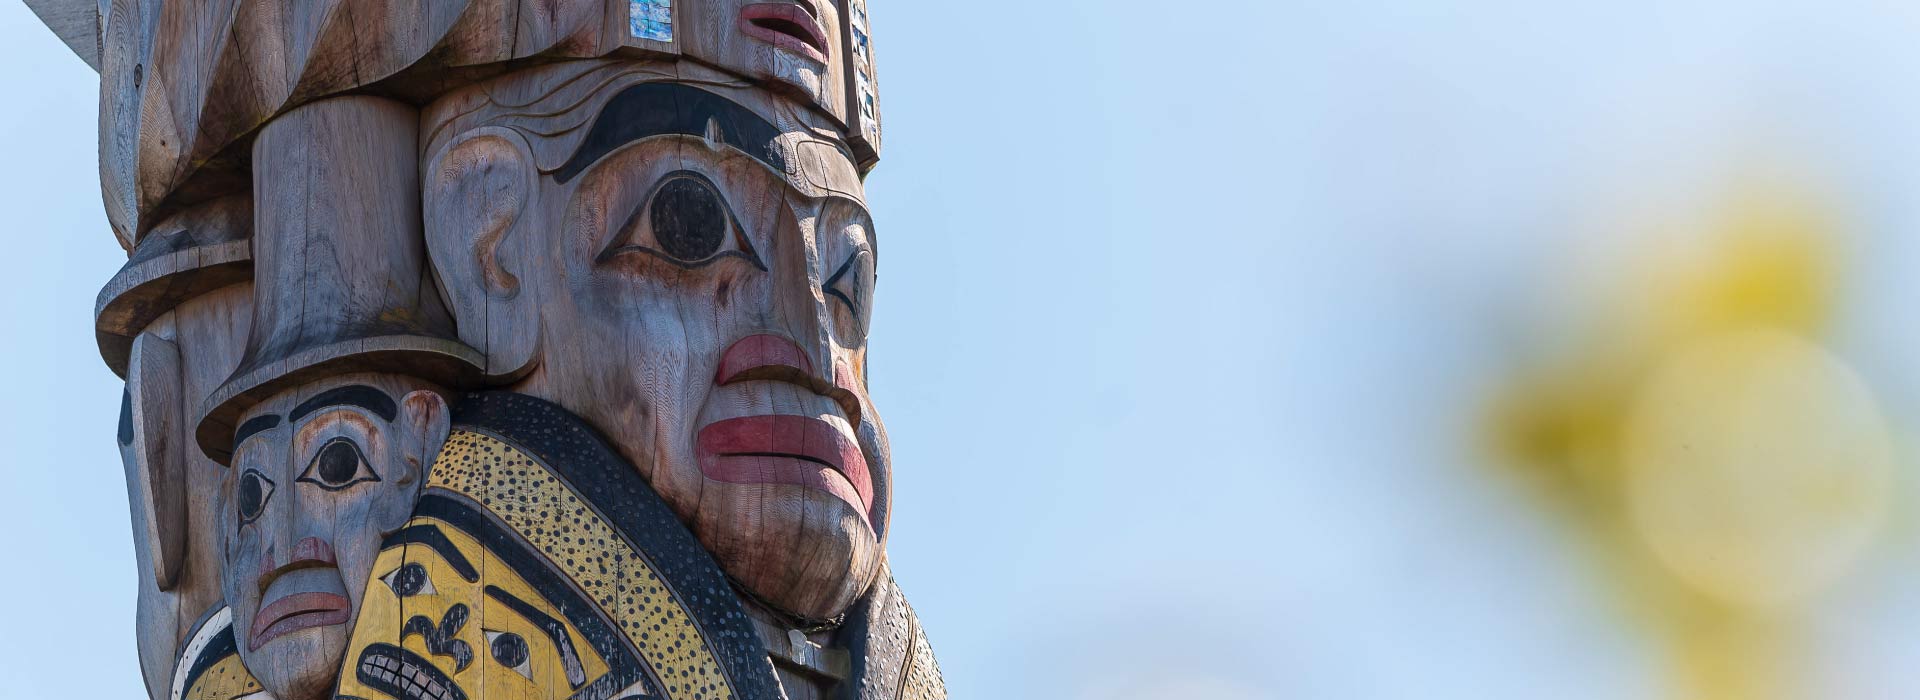 A close-up of a reconciliation pole carved with human faces against a clear sky